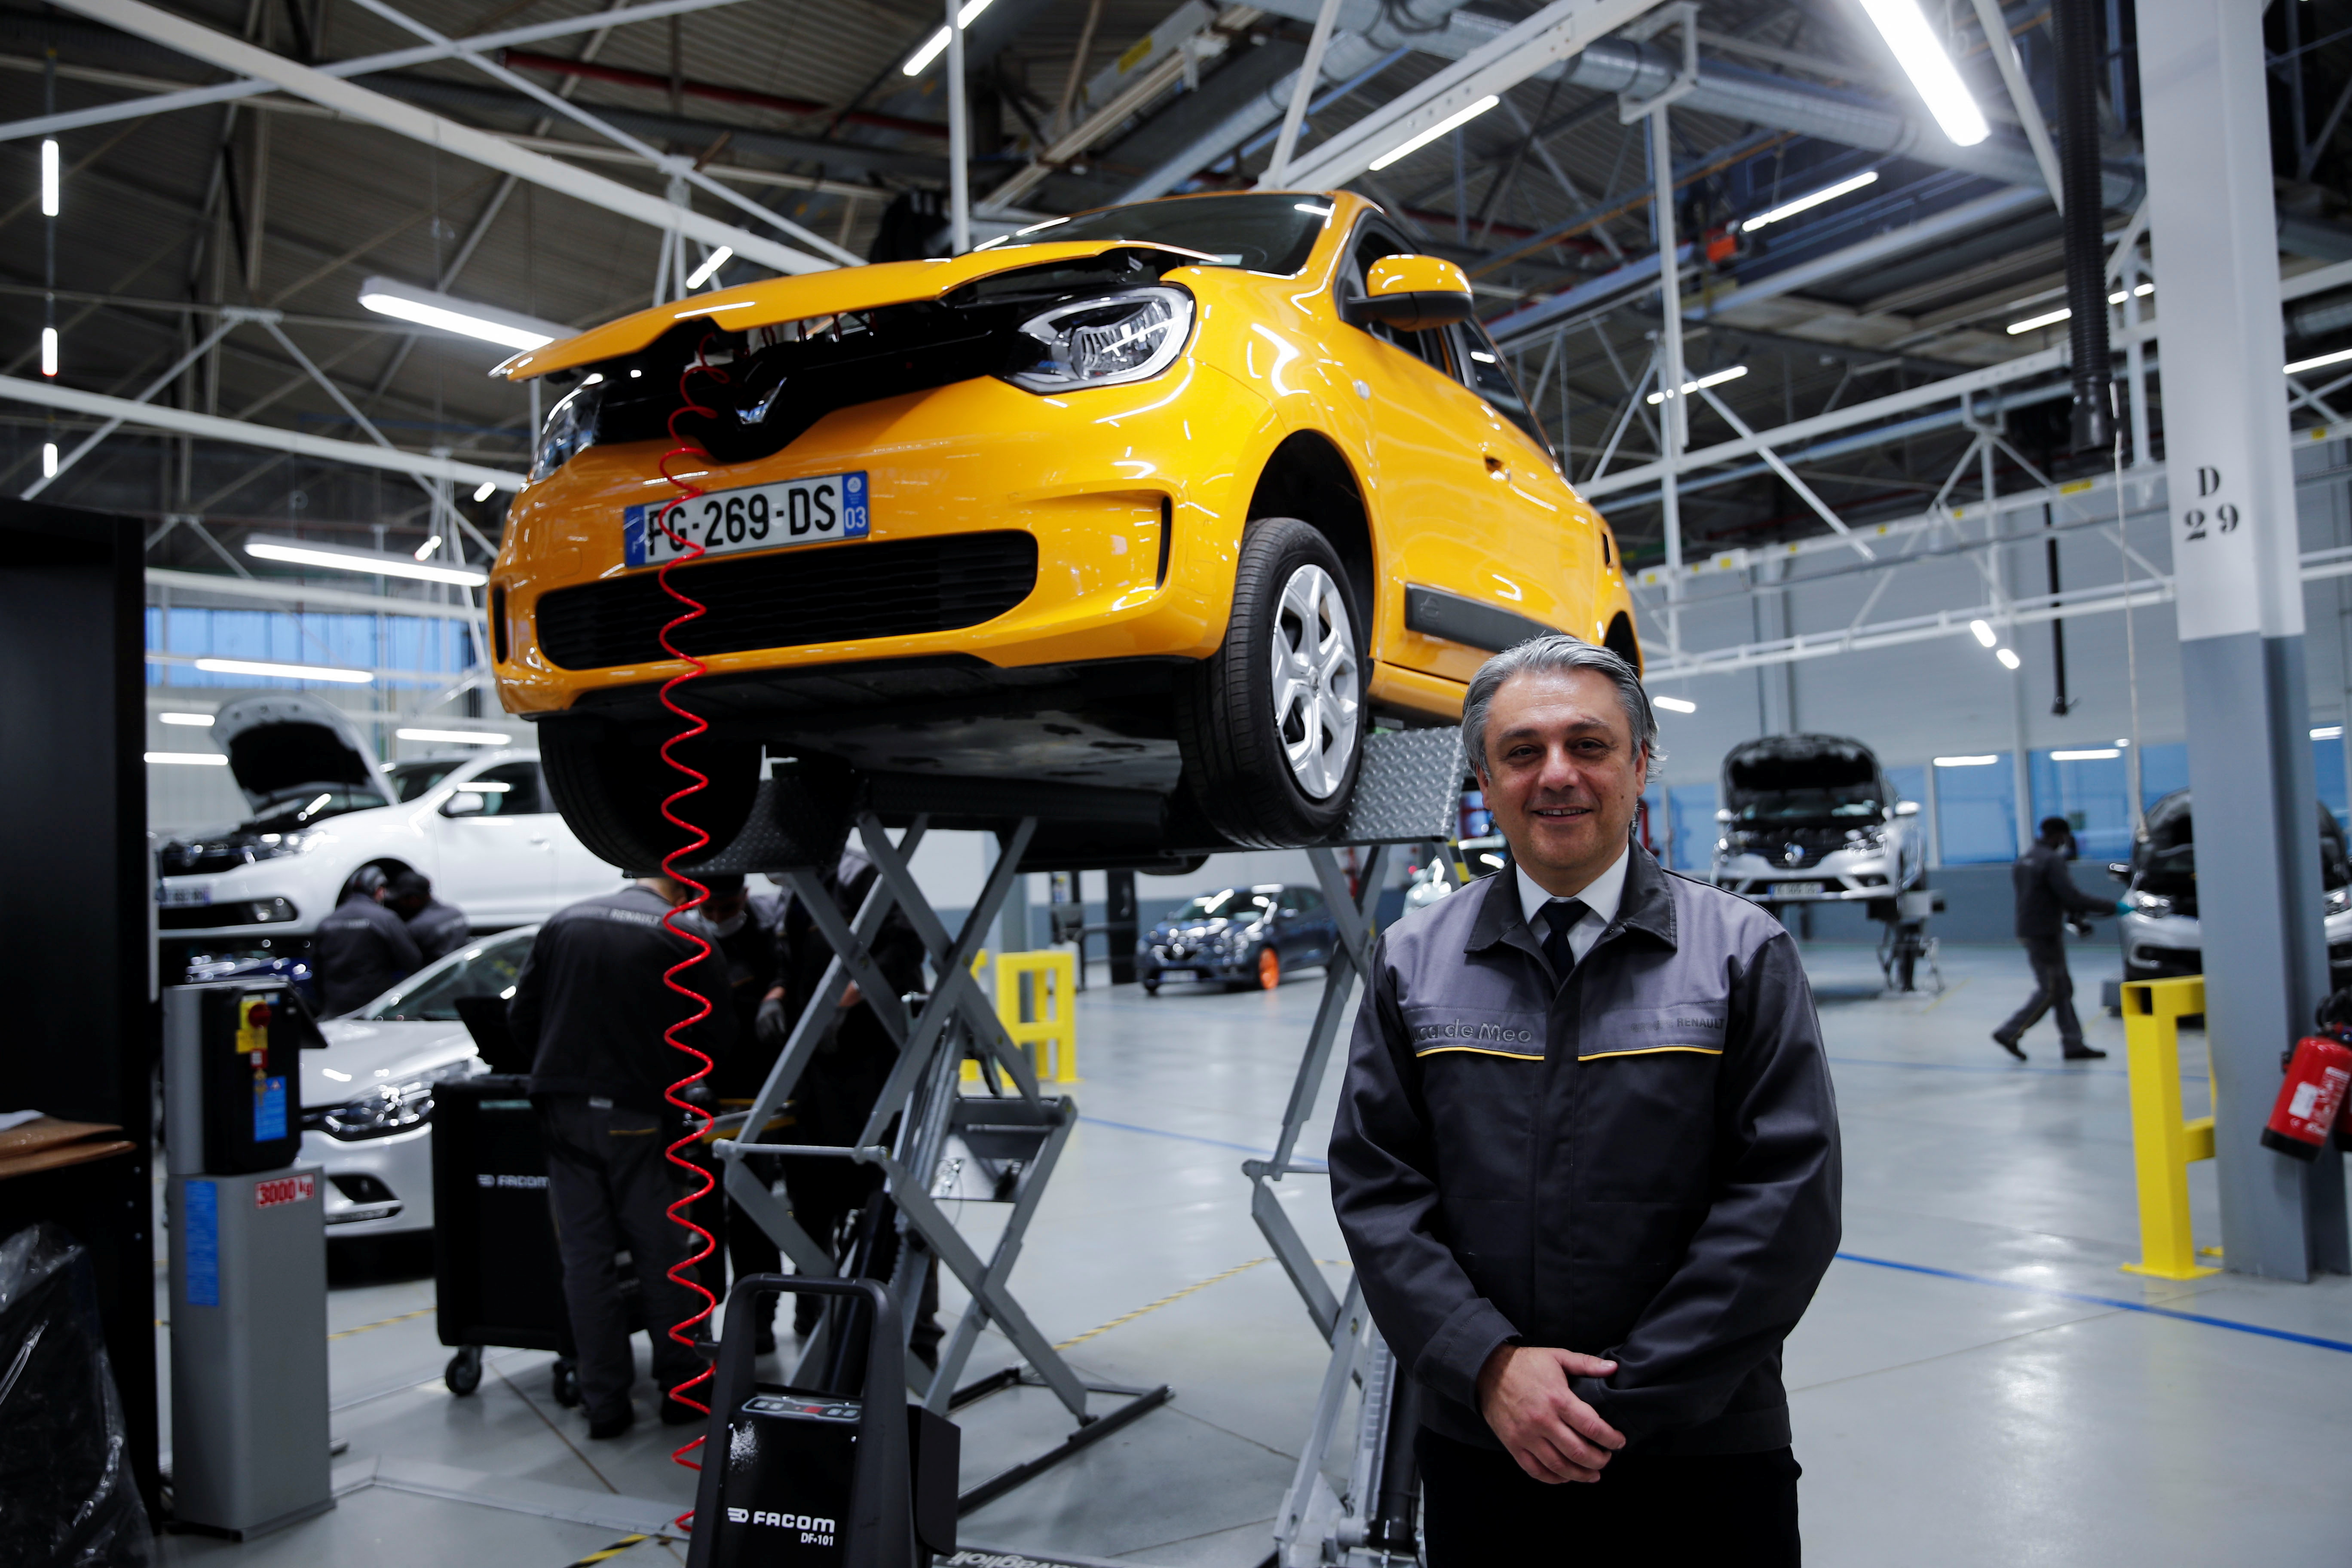 Renault Chief Executive Officer Luca de Meo poses after a news conference as part of a visit to present the Re-Factory, a second-hand vehicles' factory, in Flins, France, November 30, 2021. REUTERS/Benoit Tessier